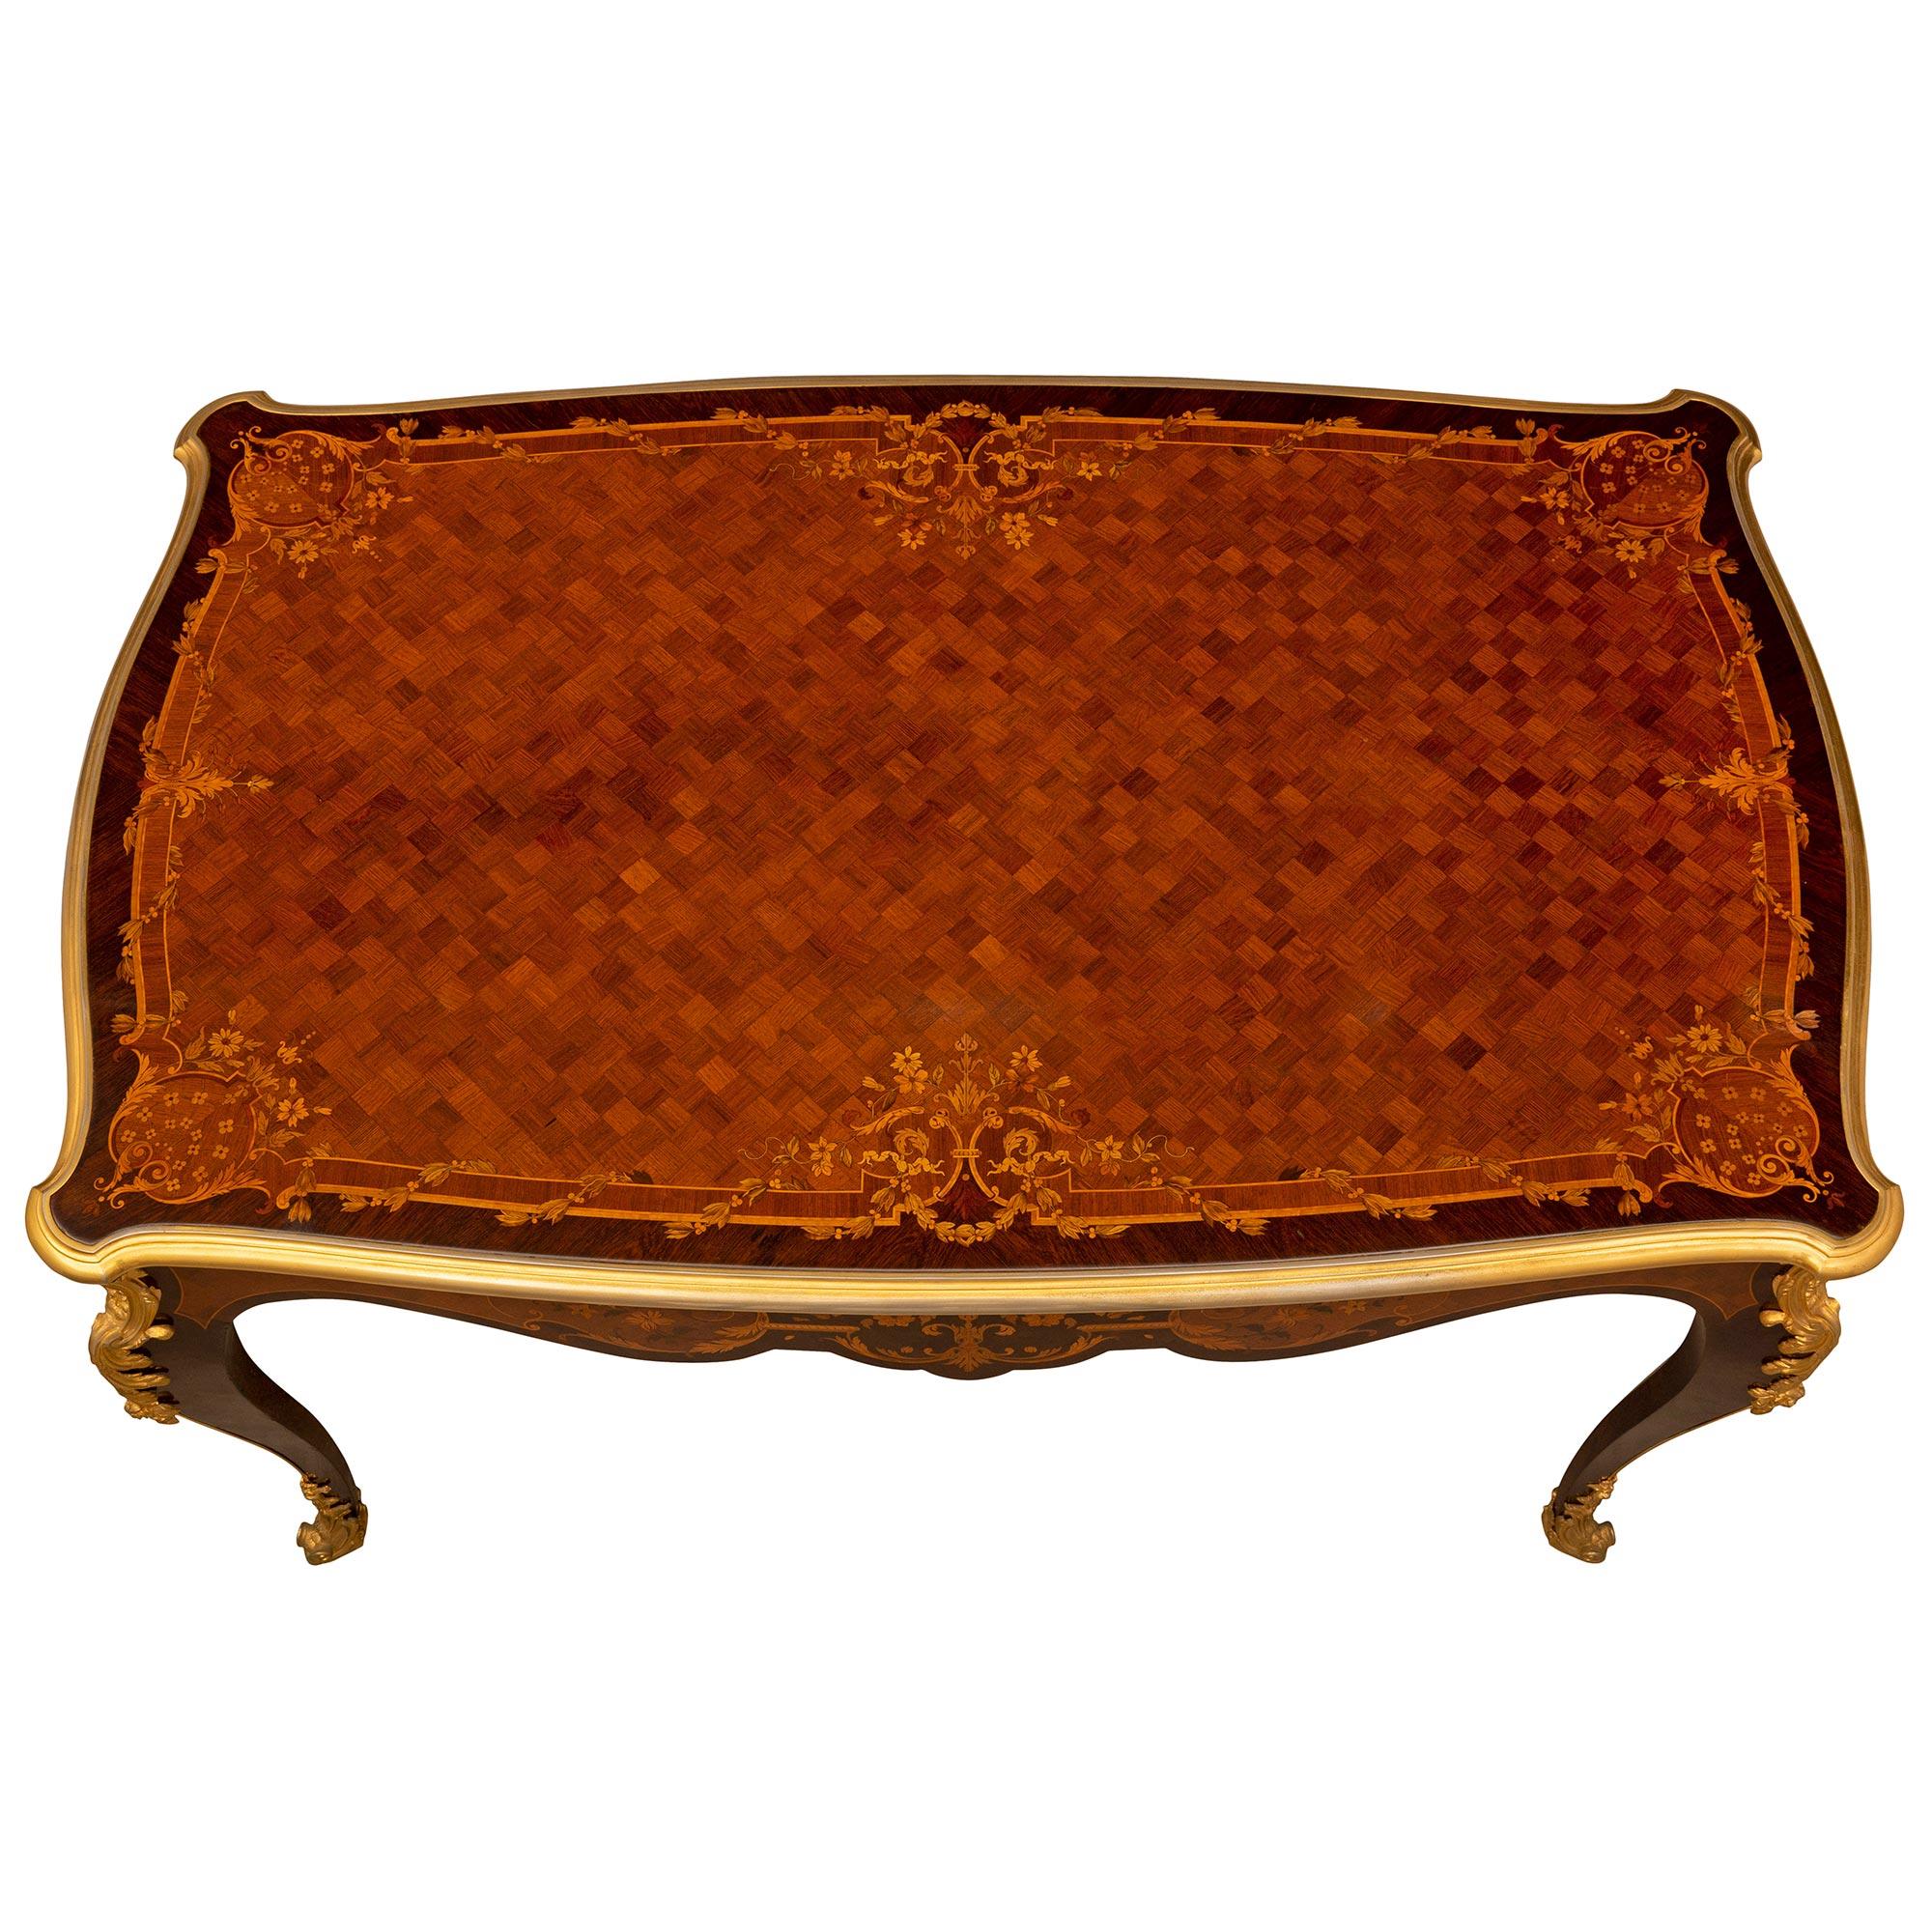 An elegant and very high quality French 19th century Louis XV st. Kingwood, exotic wood, and ormolu center table. The rectangular table signed BURY is raised by impressive cabriole legs with fine fitted wrap around ormolu sabots and lovely scrolled